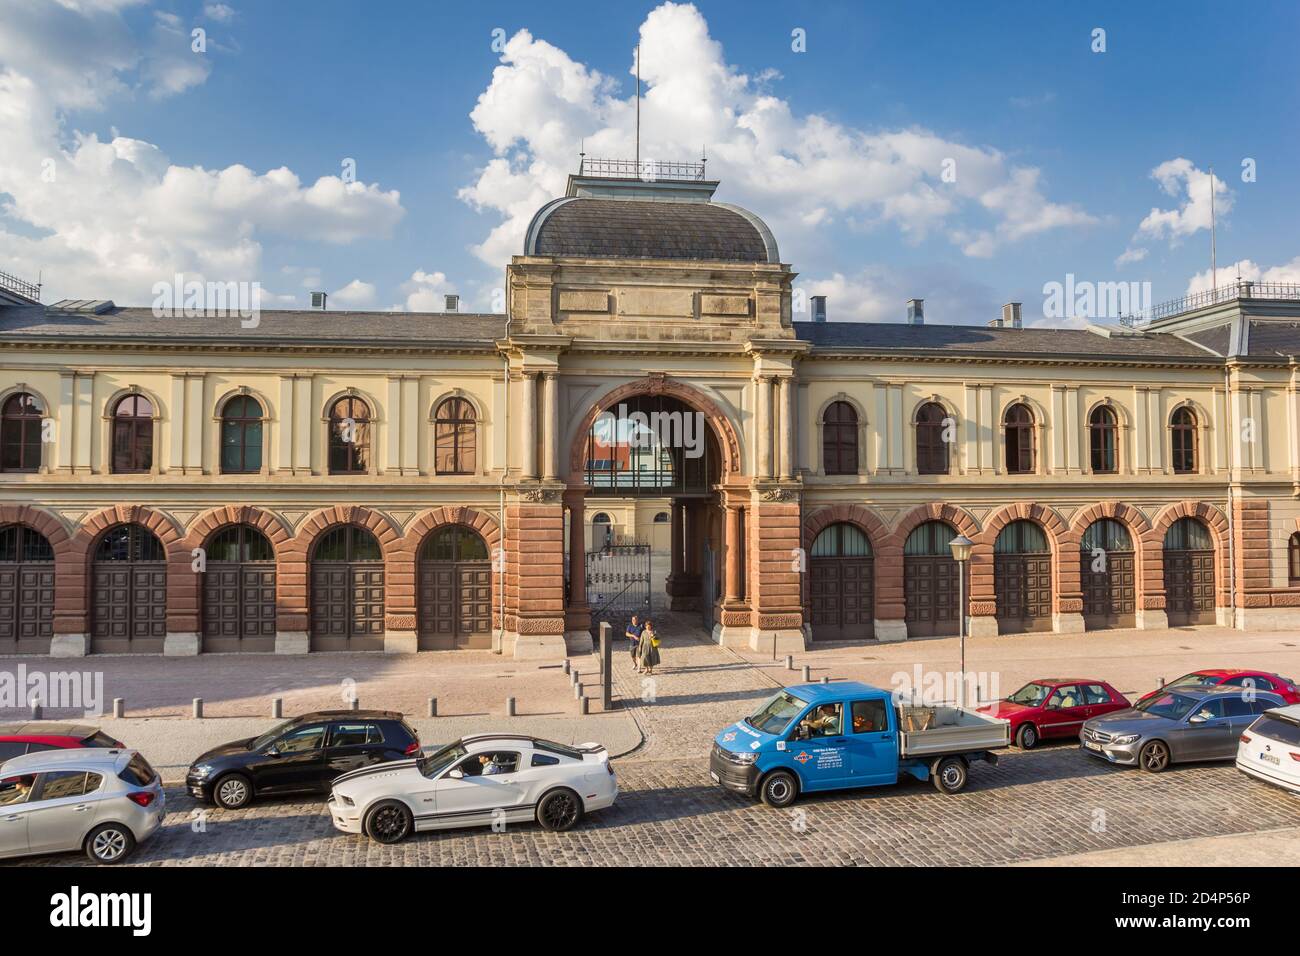 Historic Landesarchiv building in the center of Weimar, Germany Stock Photo